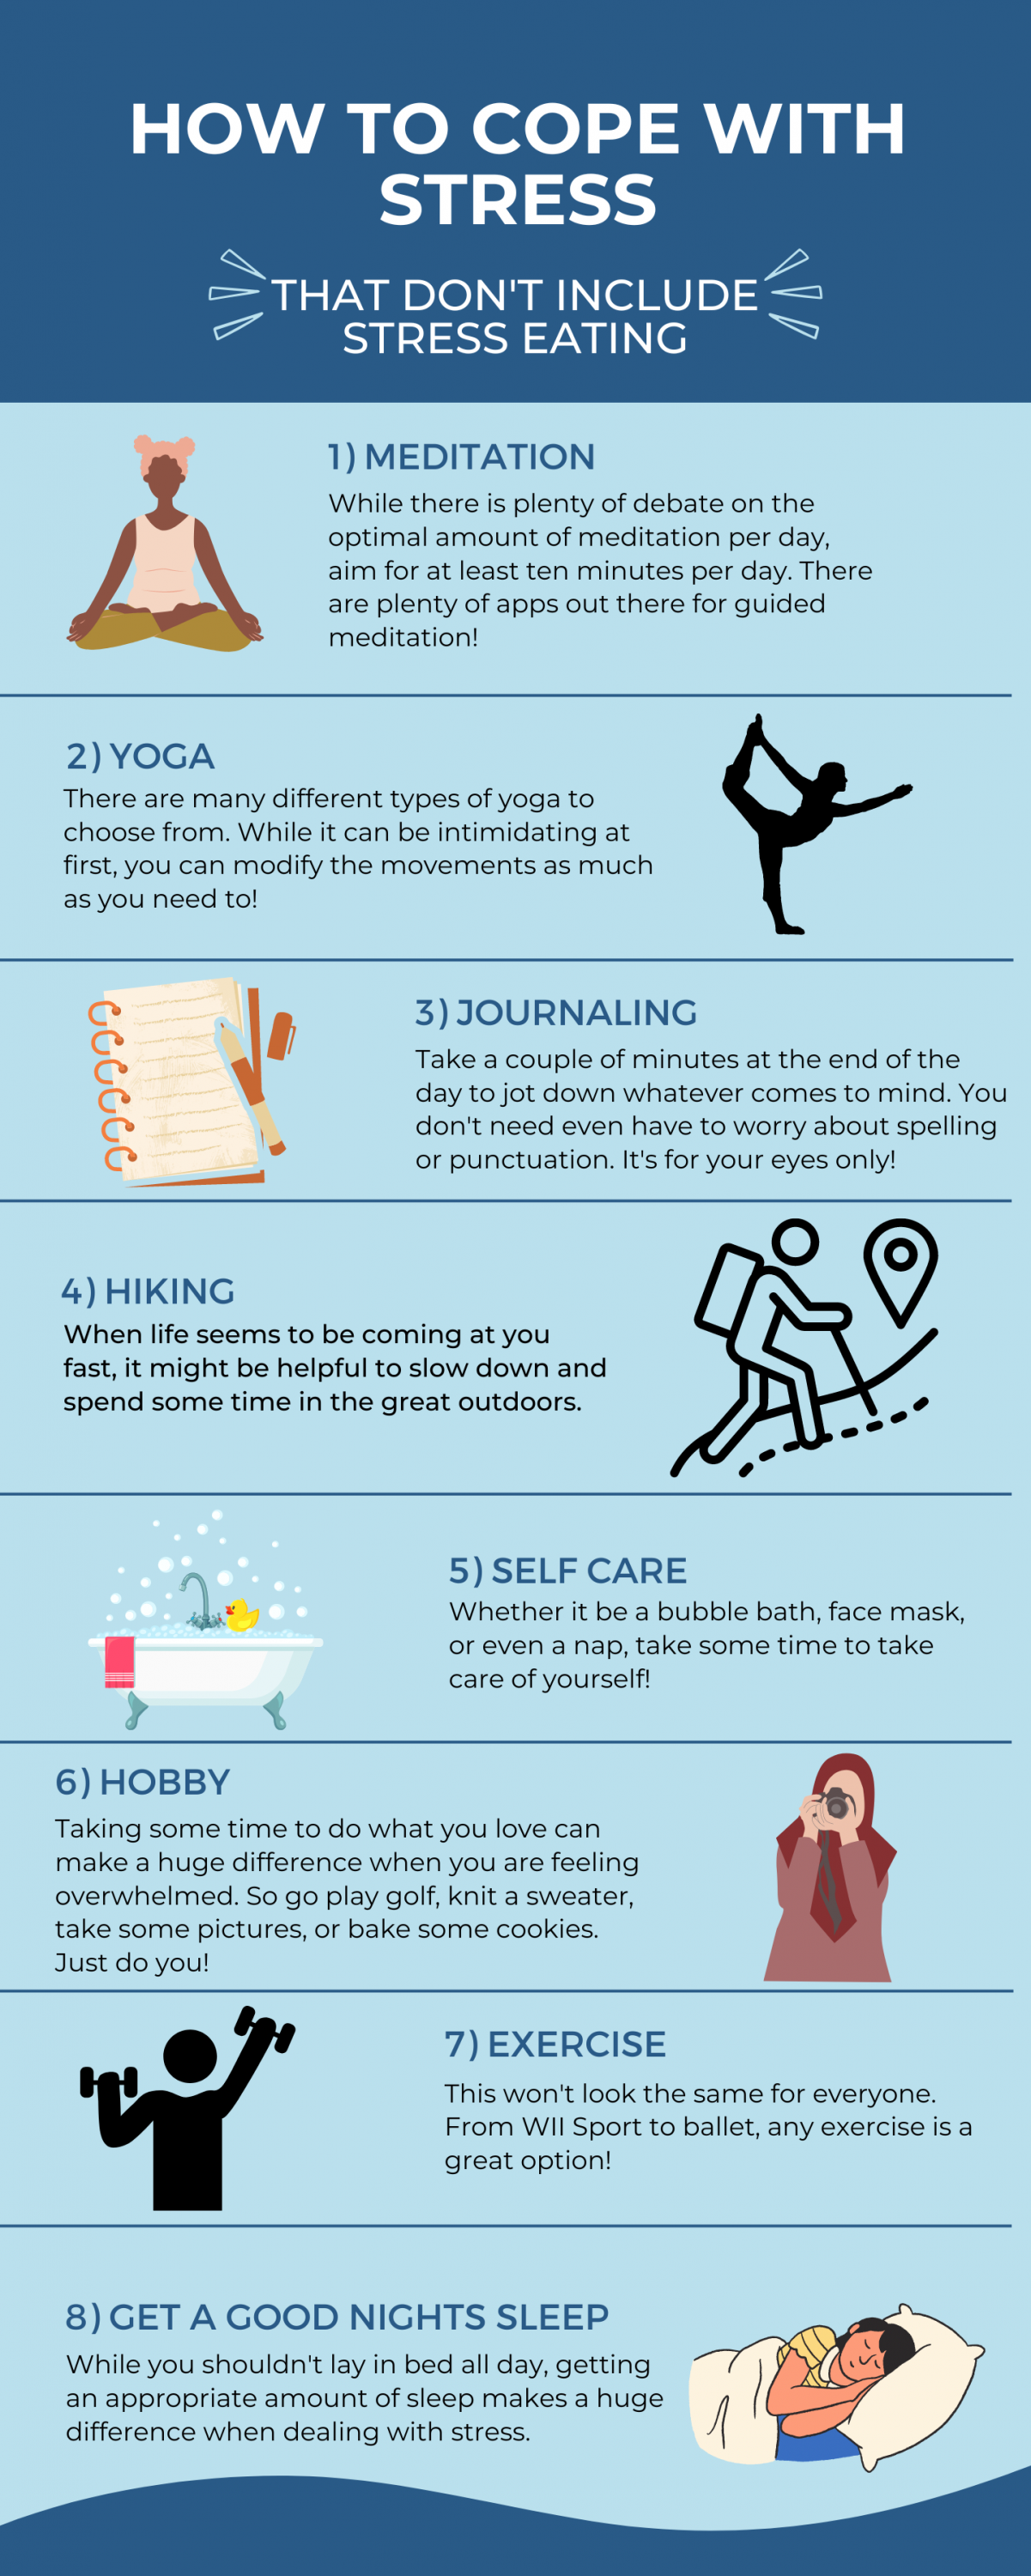 How to Cope with Stress Infographic